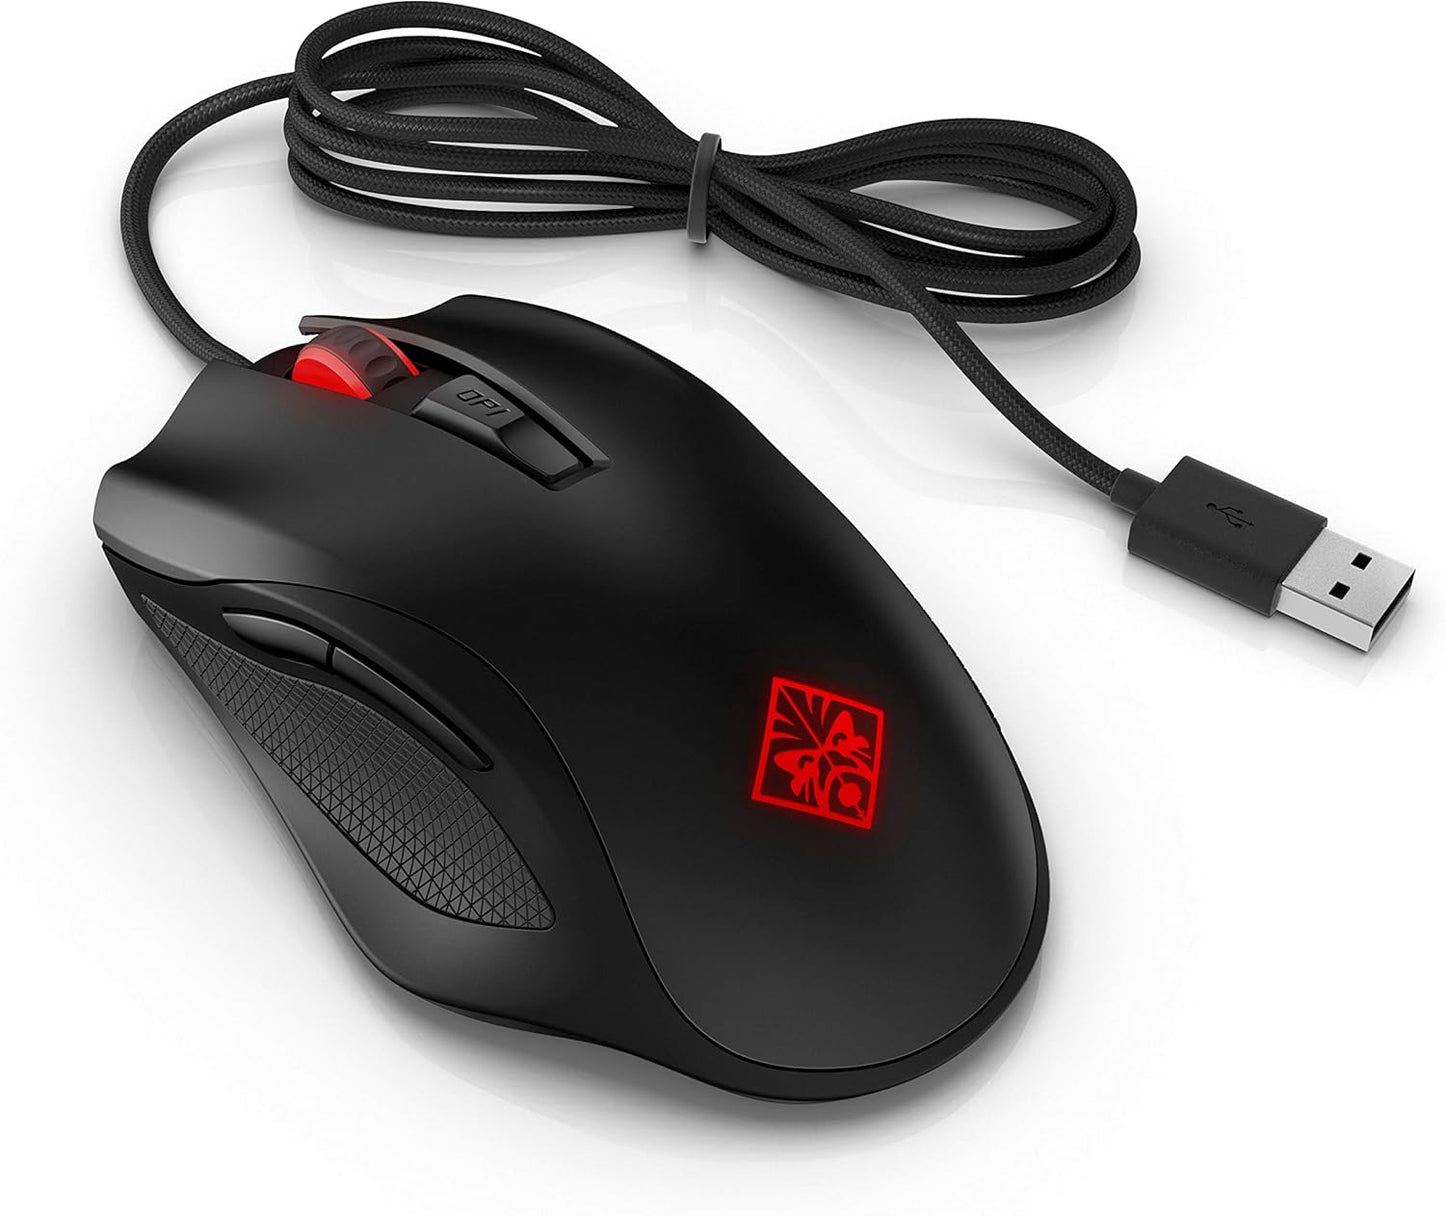 [RePacked]HP OMEN 600 Wired USB Gaming Mouse With Optical Sensor Design - Black